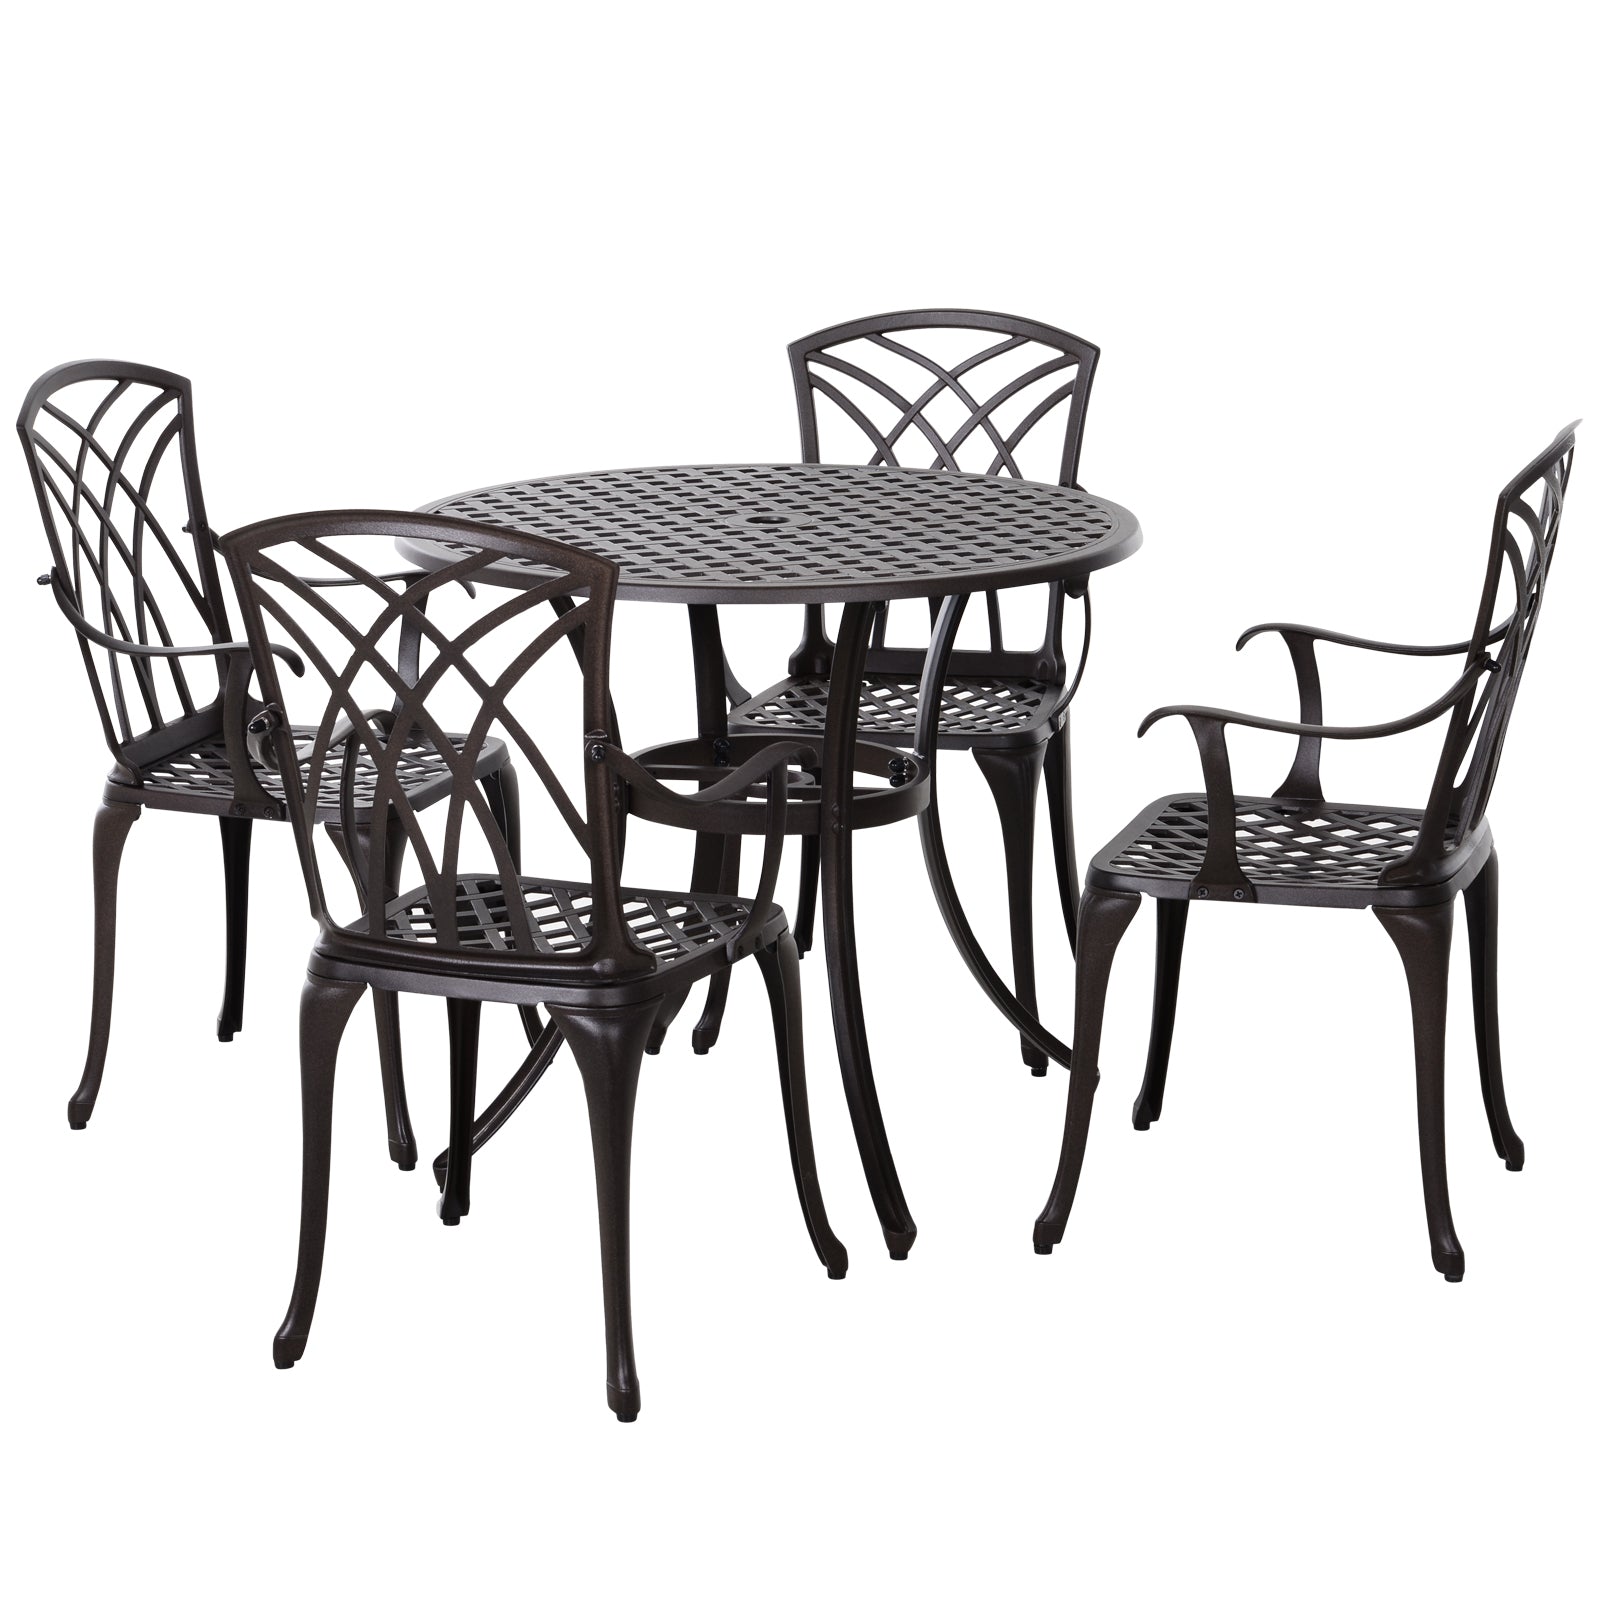 Outsunny Patio Cast Aluminium 5 PCS Dining Table & 4 Chairs Set Outdoor Garden Furniture  | TJ Hughes